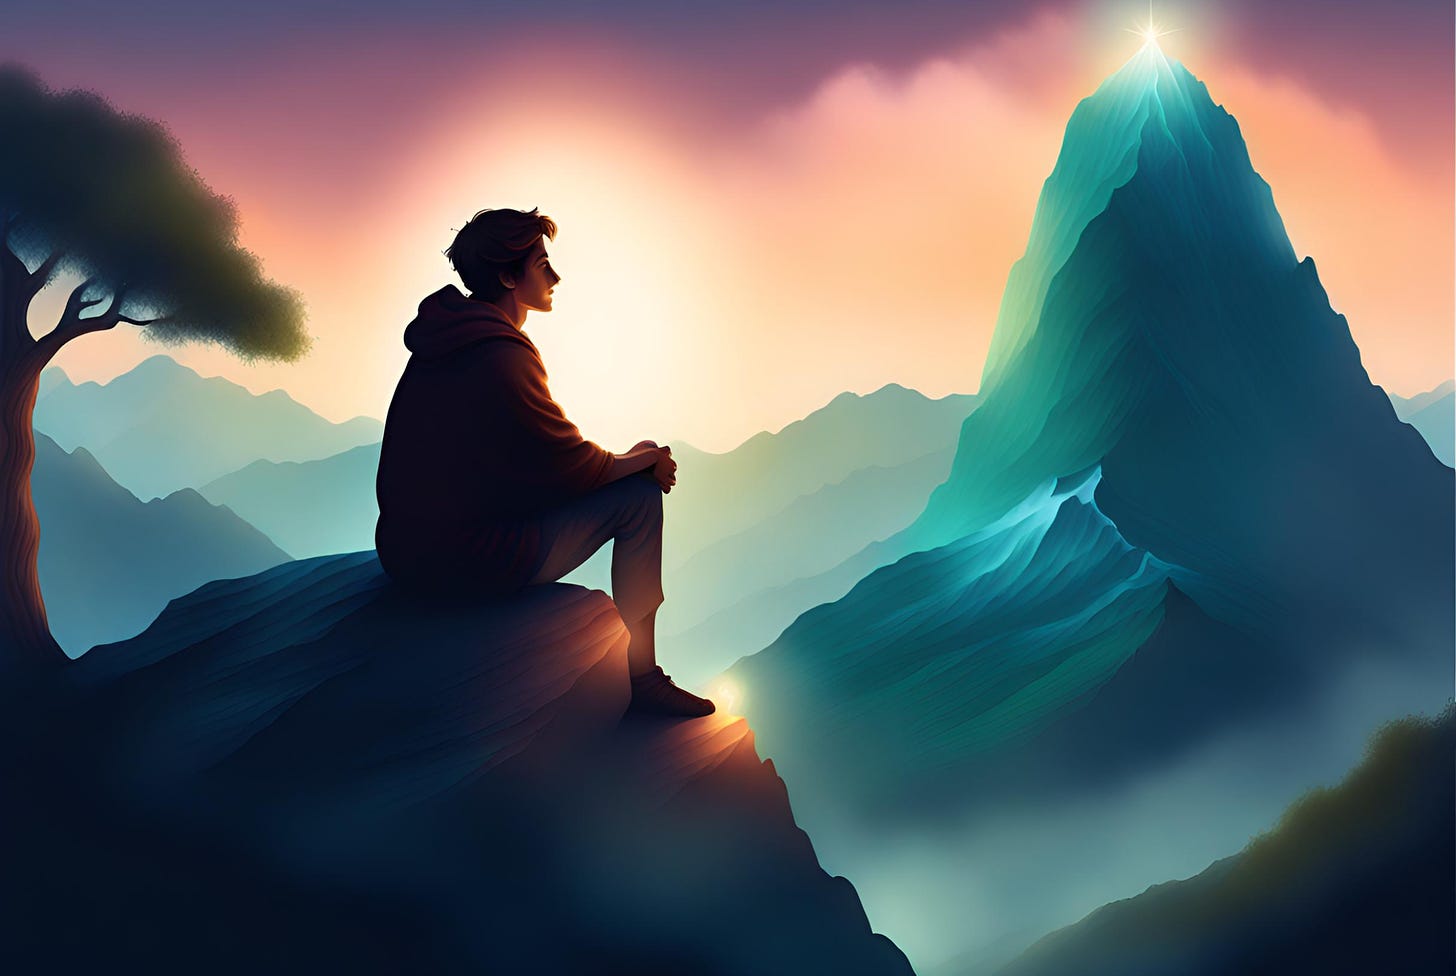 Illustration of a young man sitting at the top of a mountain